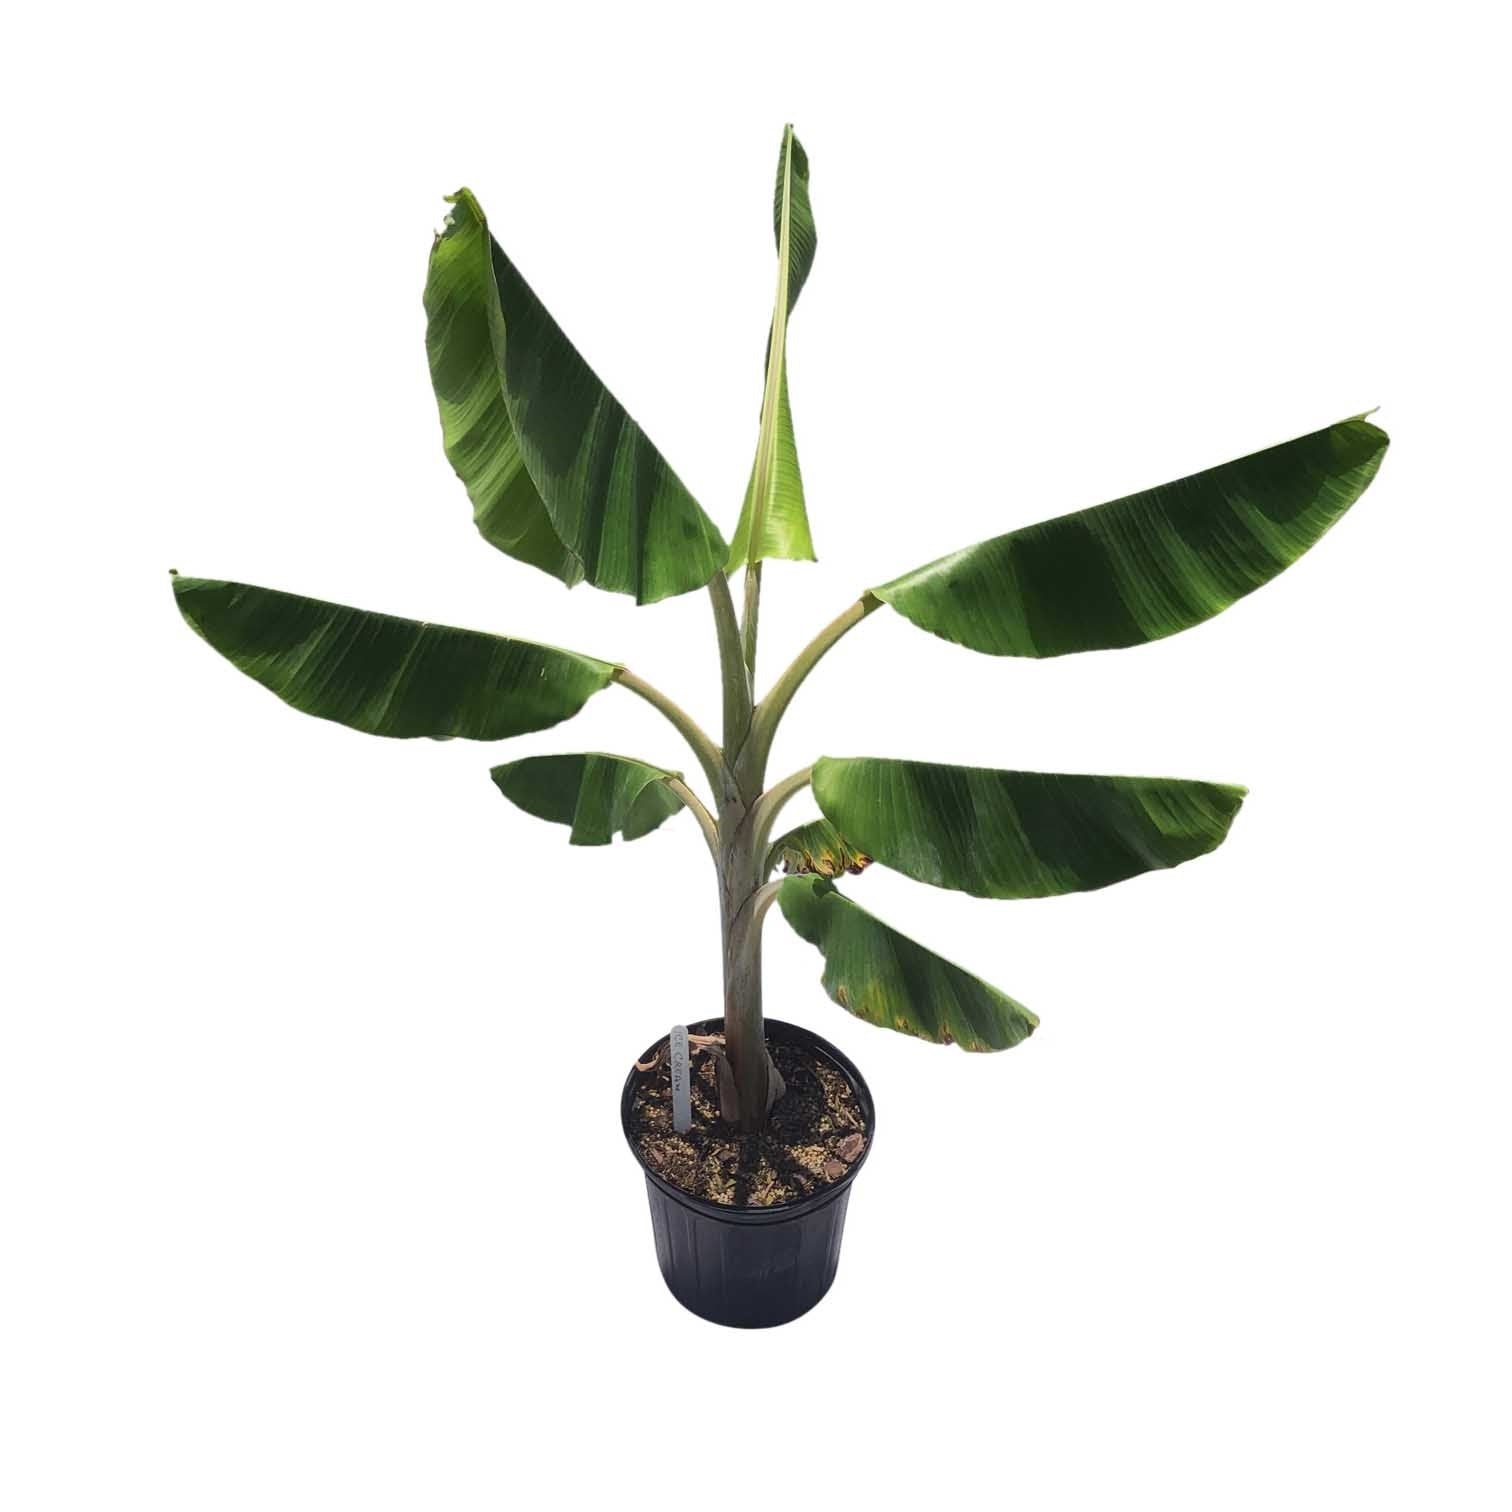 Ice Cream Banana Tree 3 Gal Container from Florida